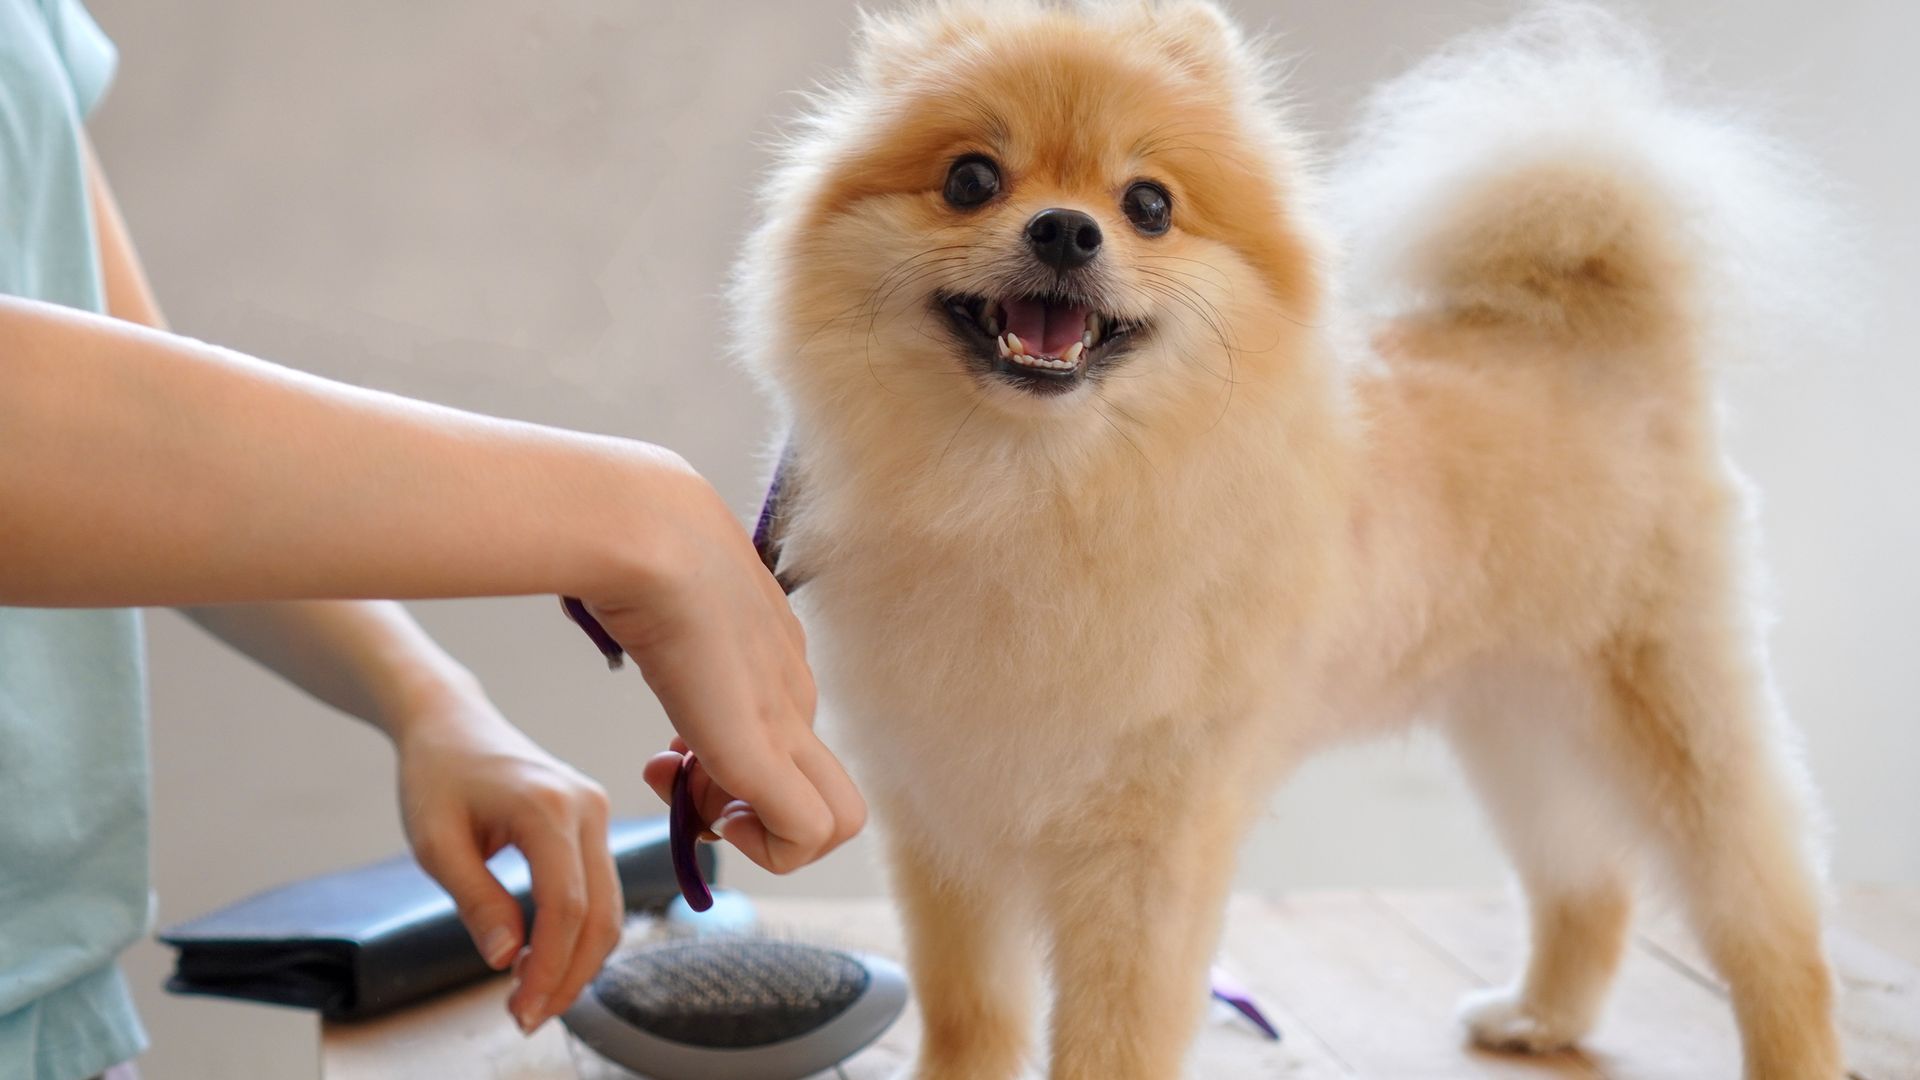 Best dog grooming kits you need to buy to keep your pooch looking picture perfect at home